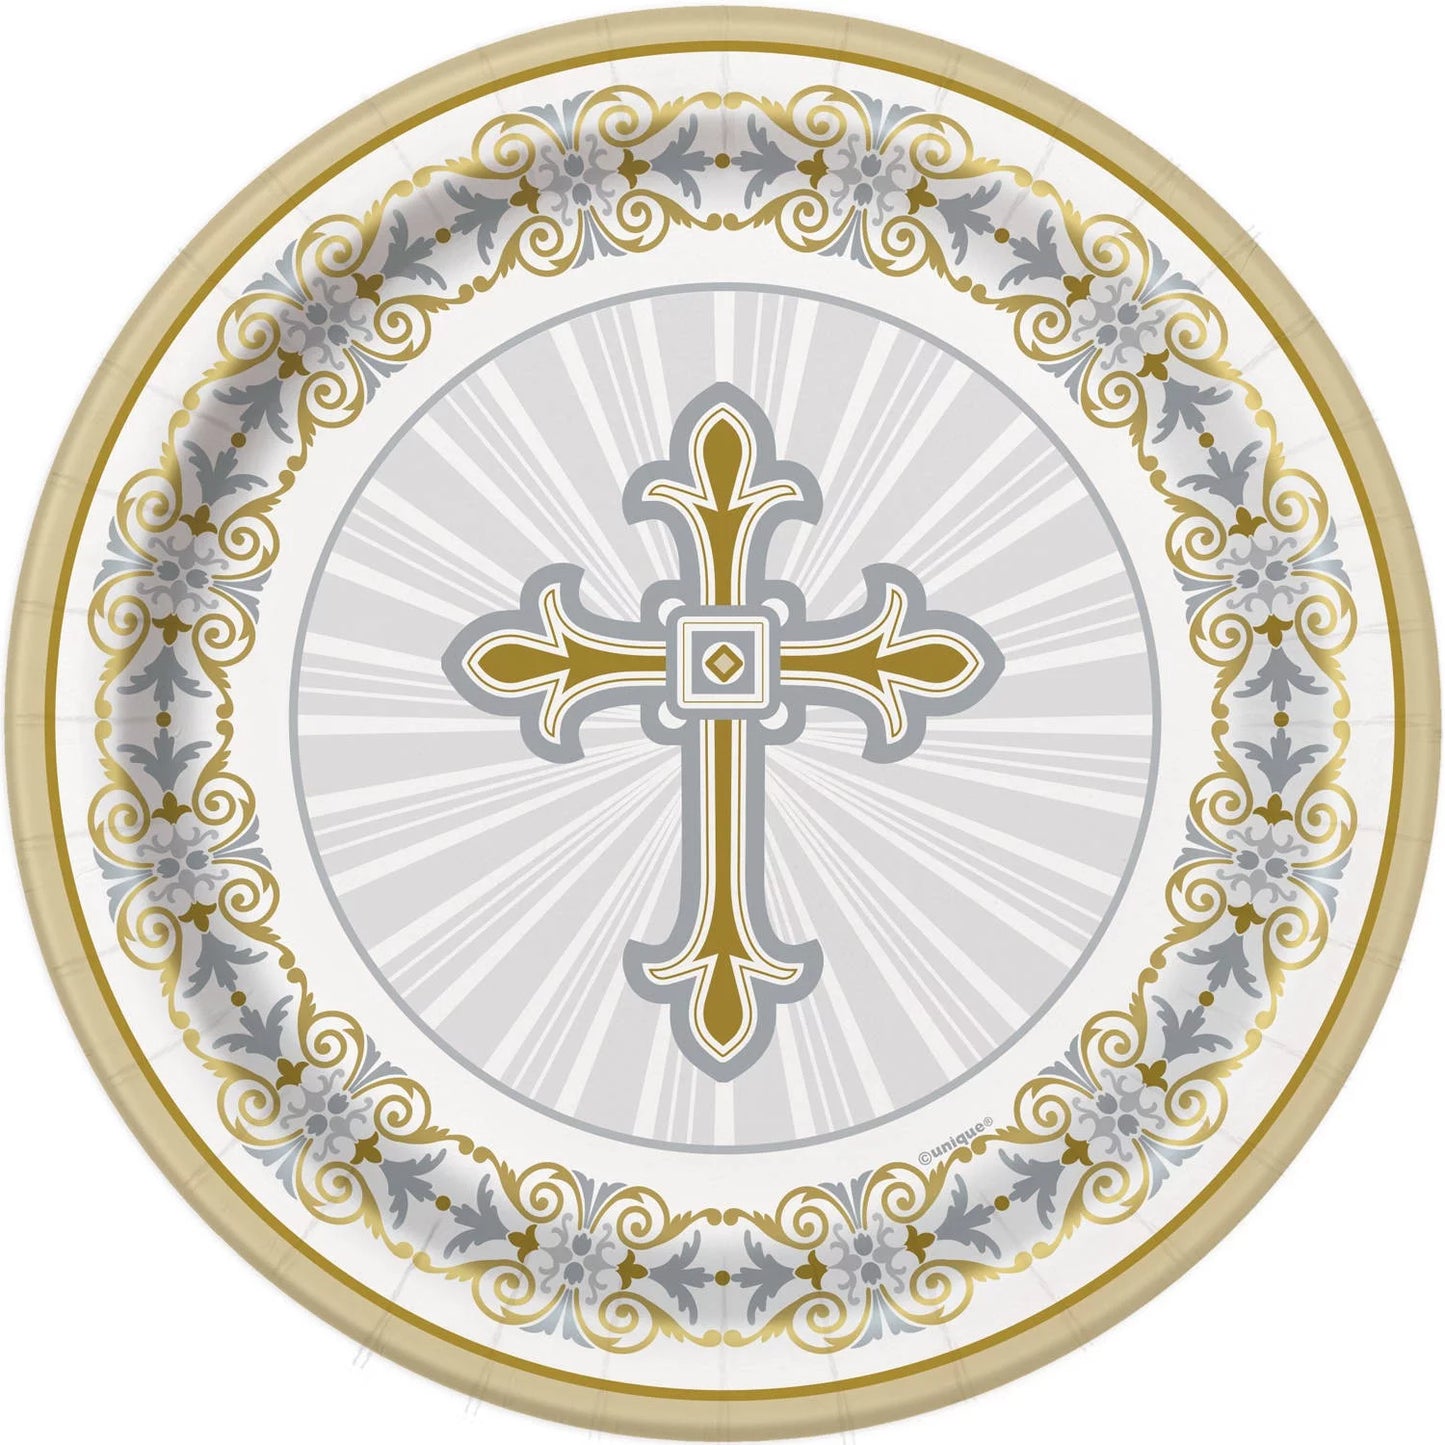 Religious Cross Gold & Silver 7" Paper Plates 8ct